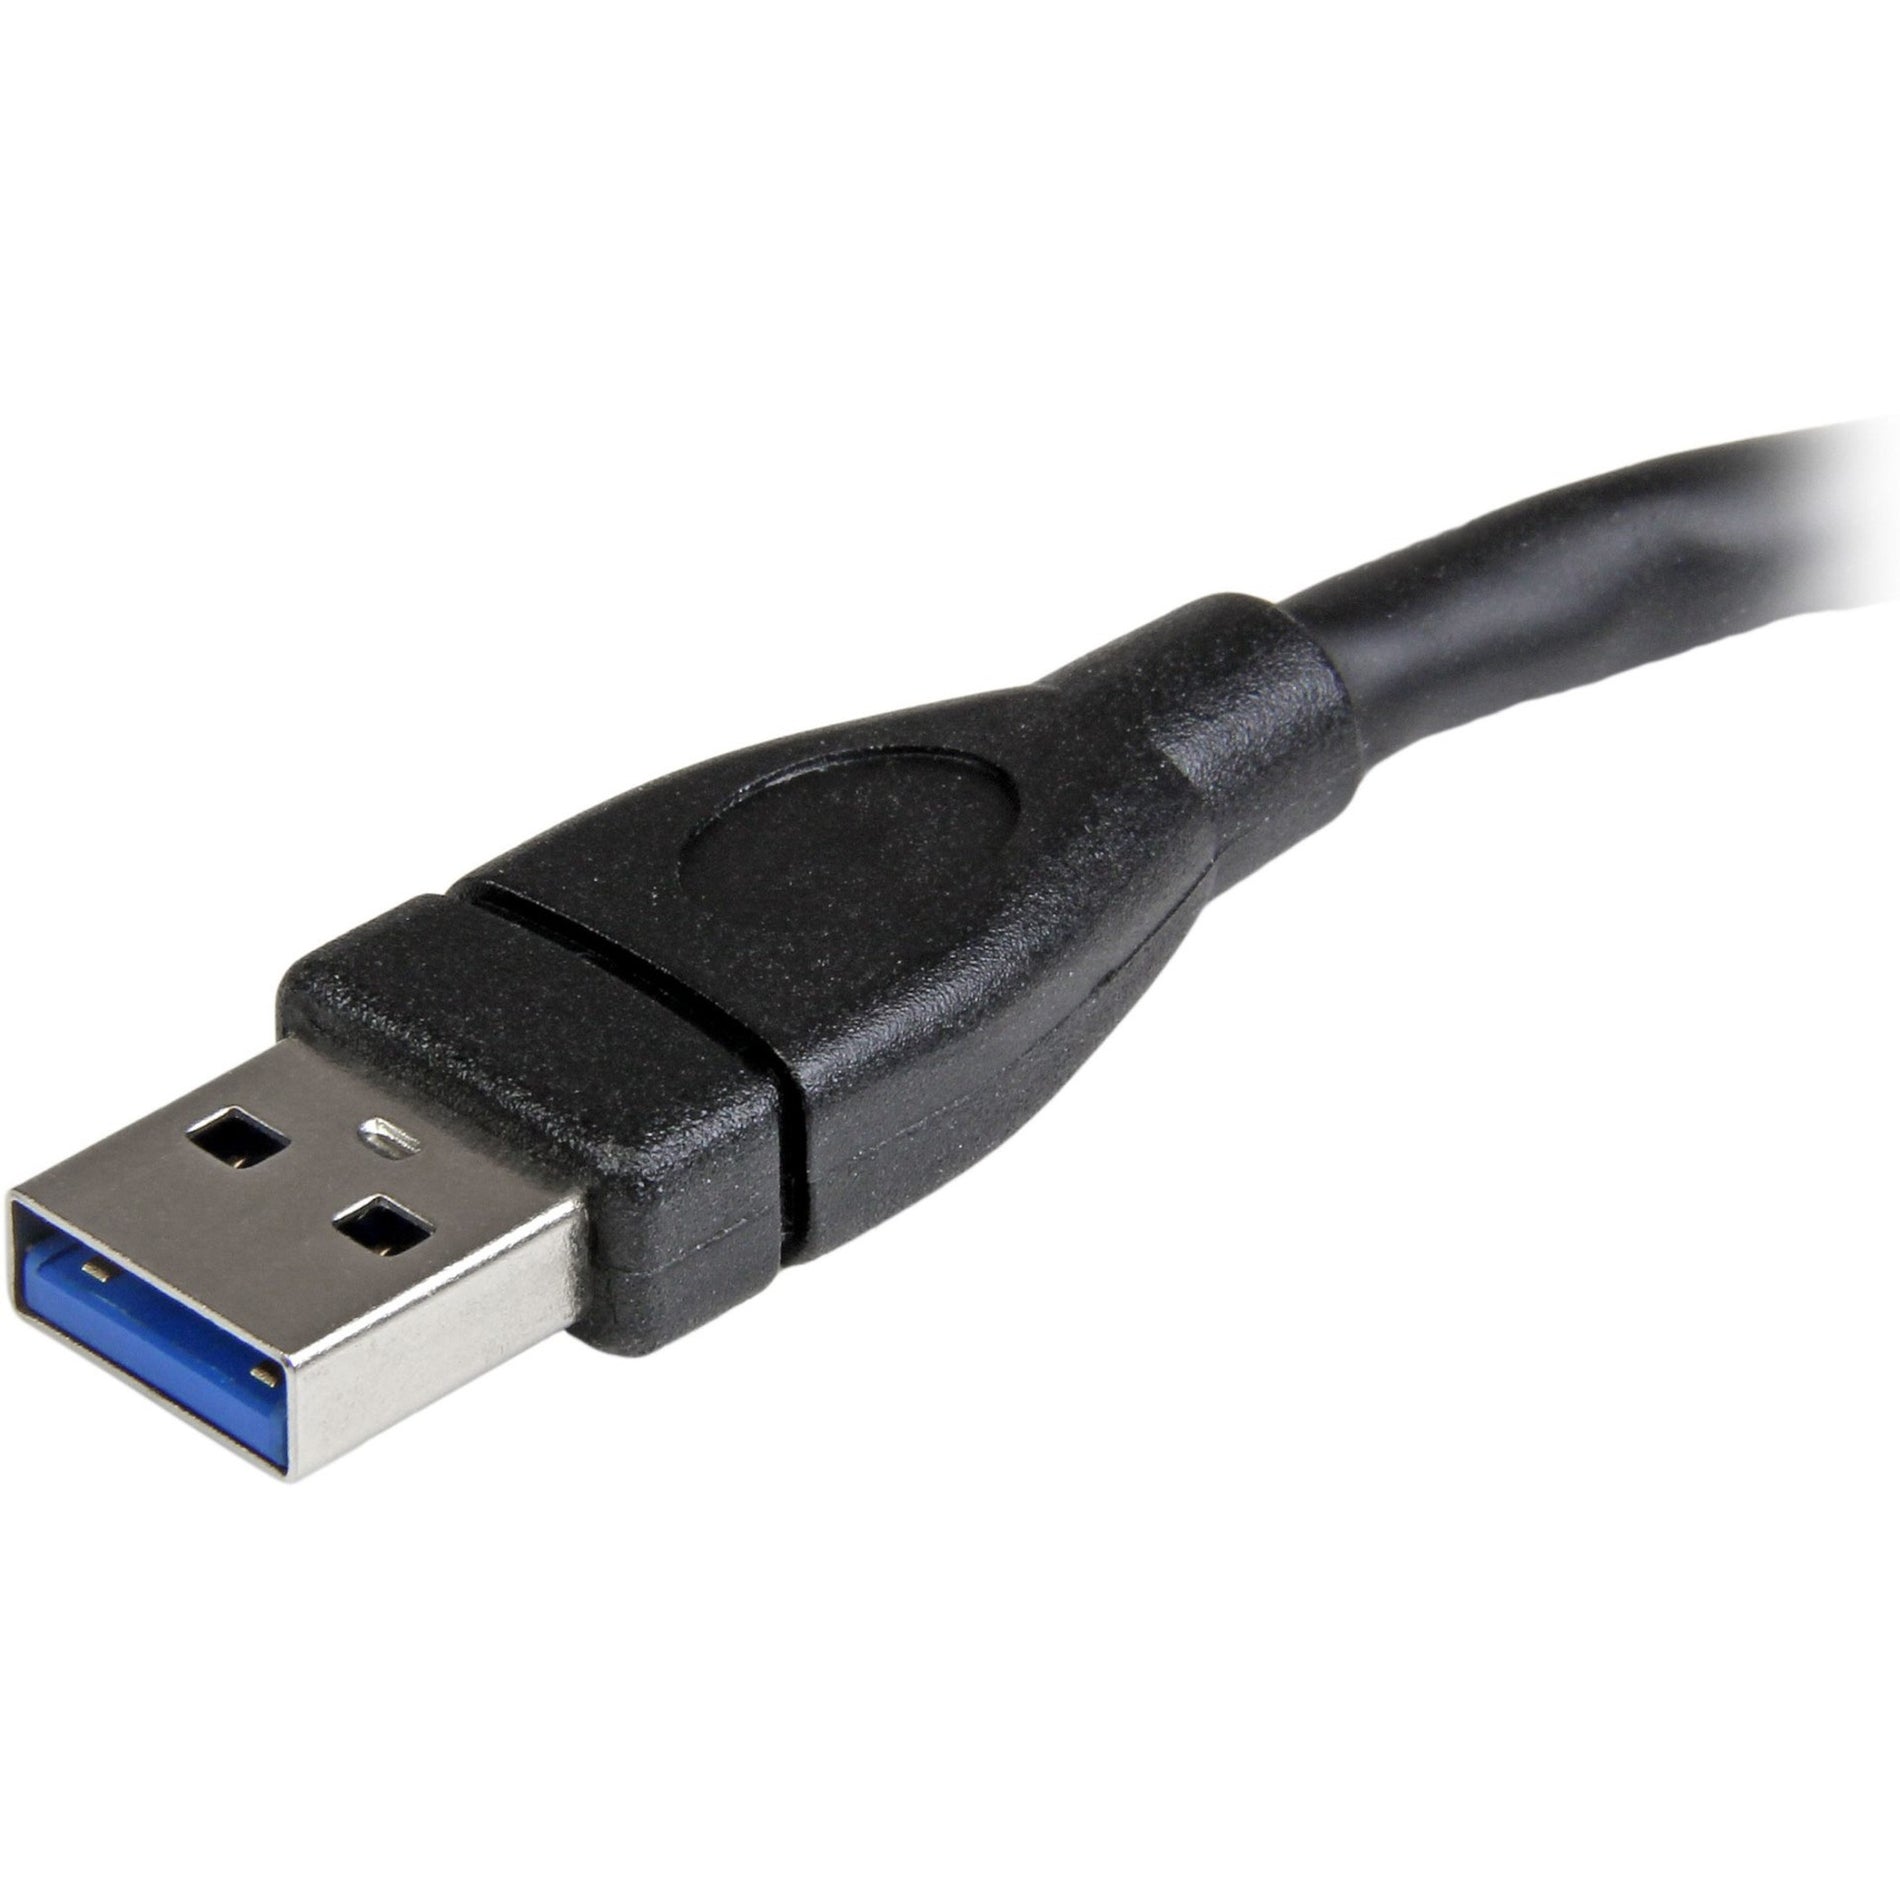 StarTech.com USB3EXT6INBK 6in Black USB 3.0 Extension Adapter Cable A to A - M/F, Molded, Damage Resistant, Strain Relief, 5 Gbit/s